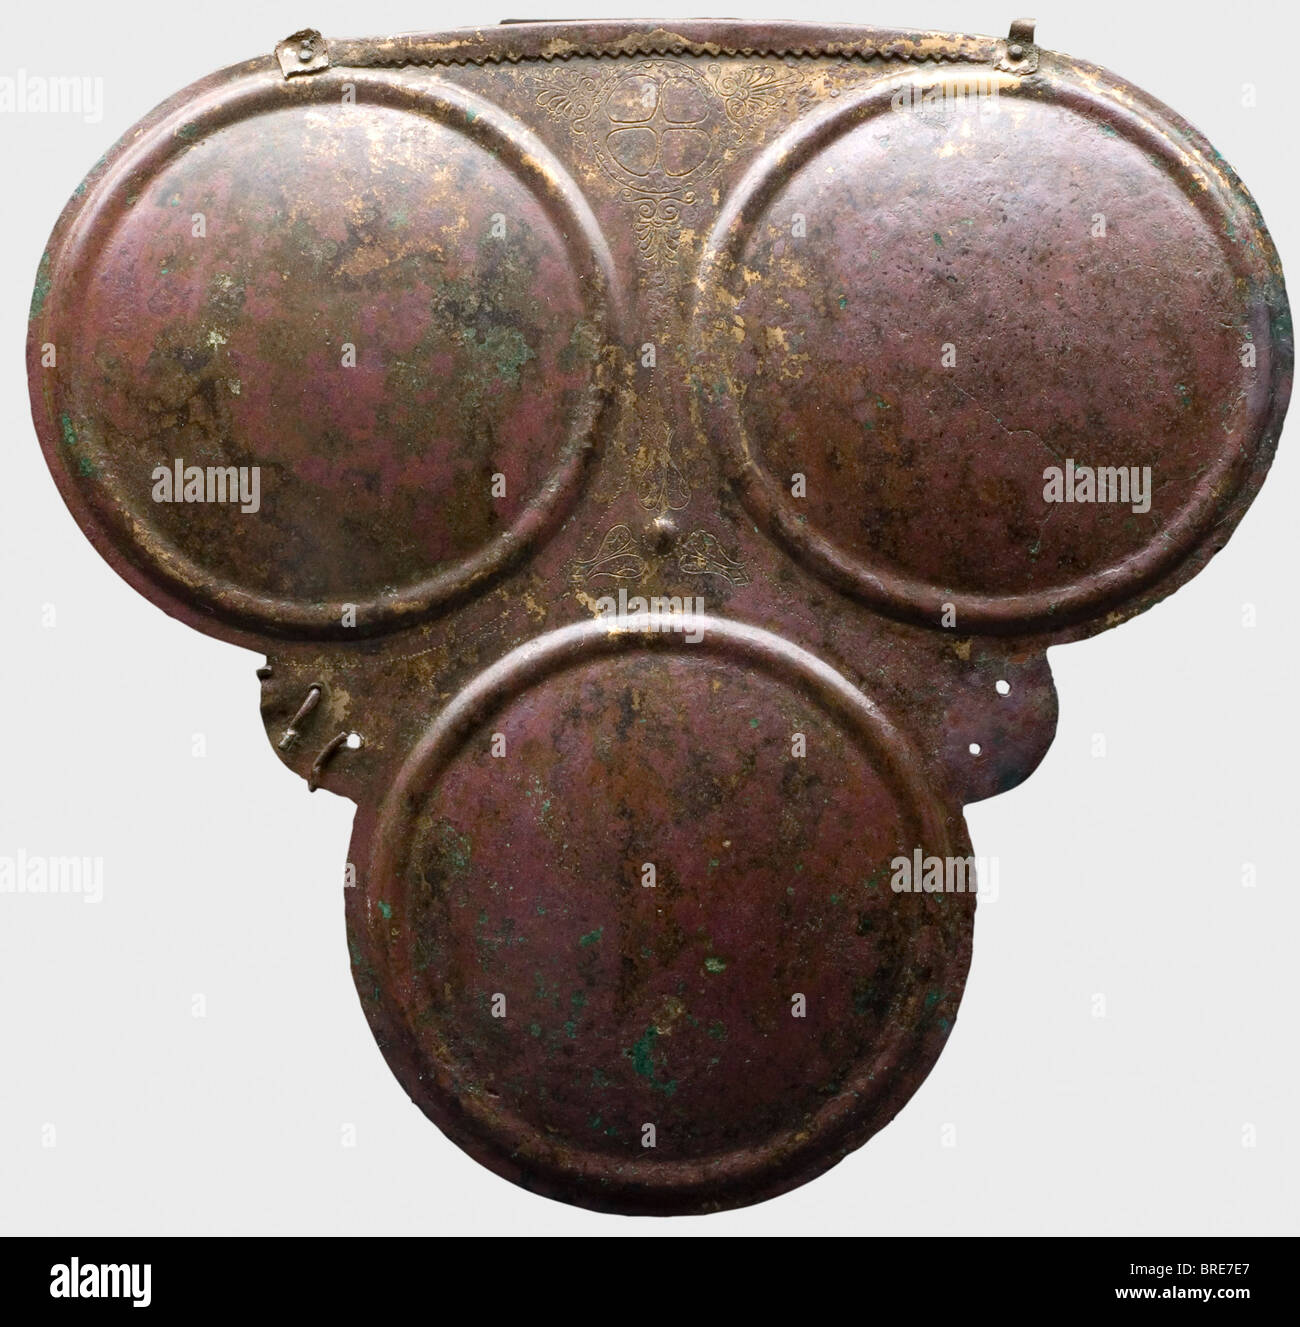 A Samnite triple disc breastplate, 4th century B.C. A bronze breastplate with three large discs, and fine decorative lines of dots and a four-spoke wheel ornament amid palmettes. A small umbo within leaf decoration in the centre of the armour plate. The upper rim is serrated and folded outward, with an attachment (fragments preserved) riveted at the each end for the rings of the shoulder harness. A pair of small holes in the lateral flaps and flaring remnants of the bronze fastenings for the side pieces. Height 24.5 cm. Width 26.2 cm. Wei historic, historical, , Stock Photo